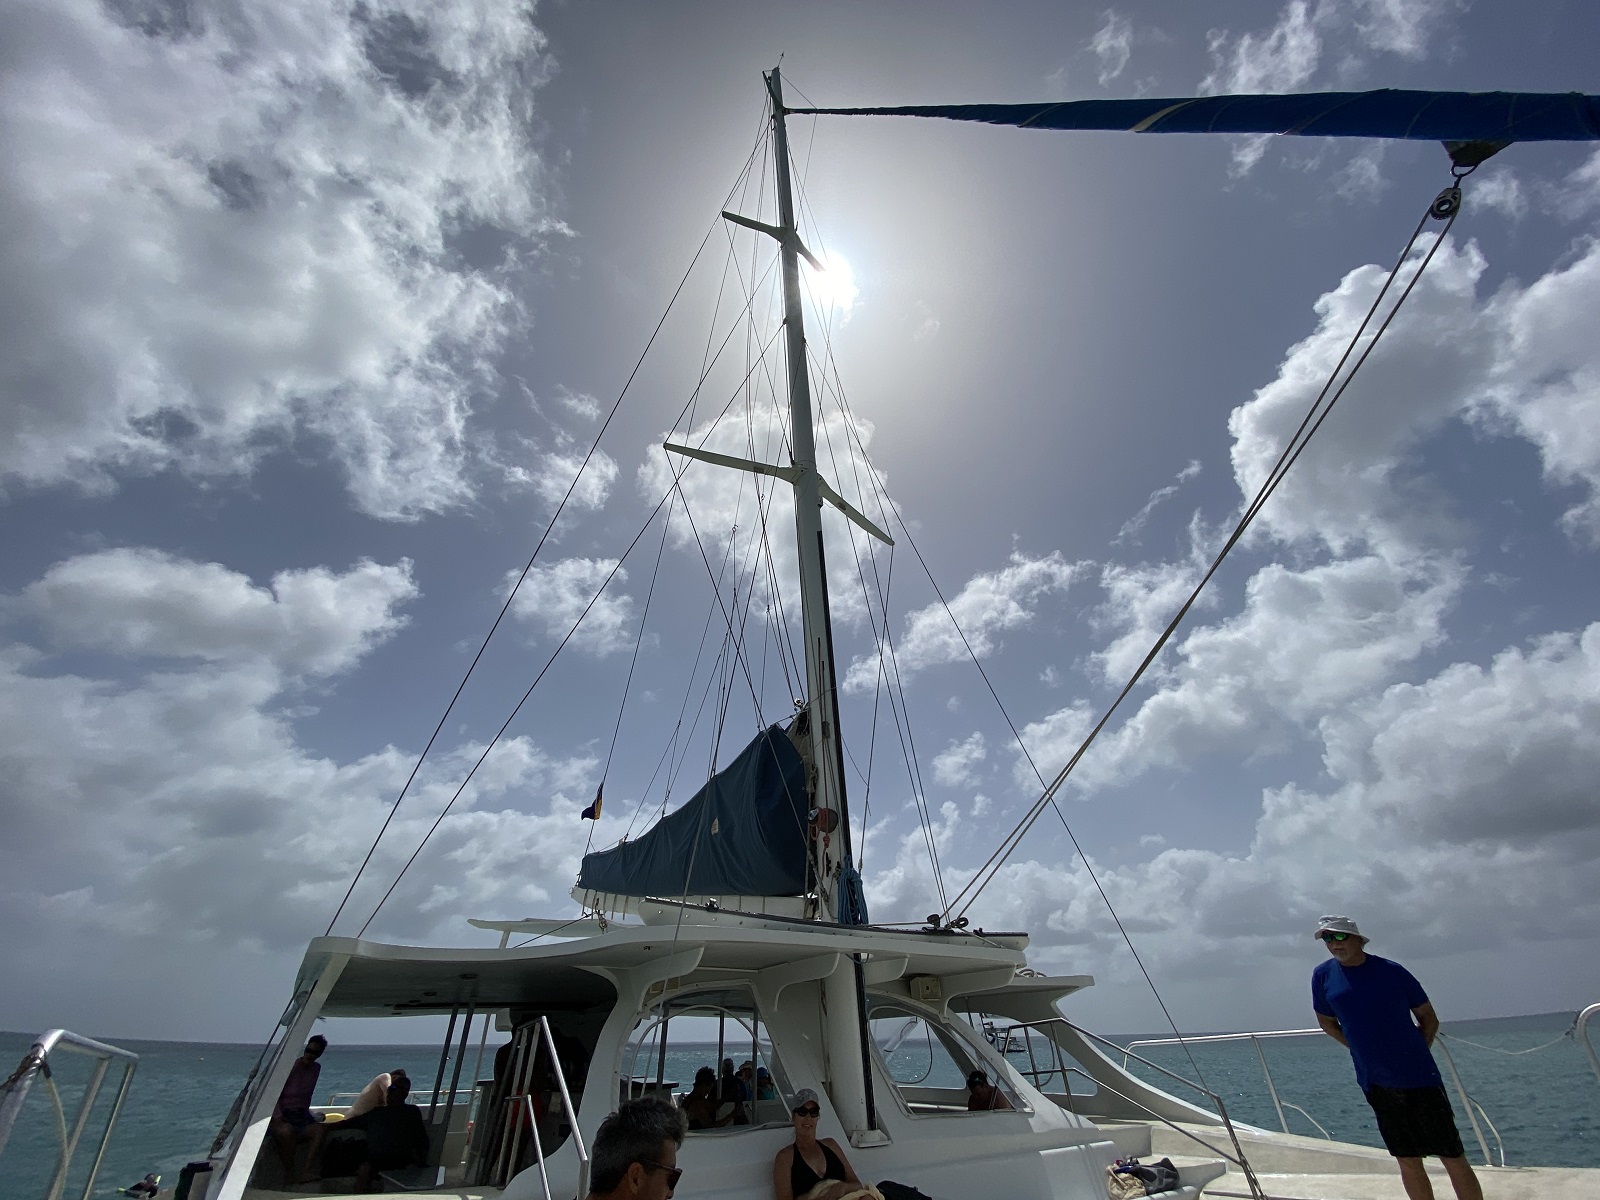 A view from one of the catamaran's two sun deck areas